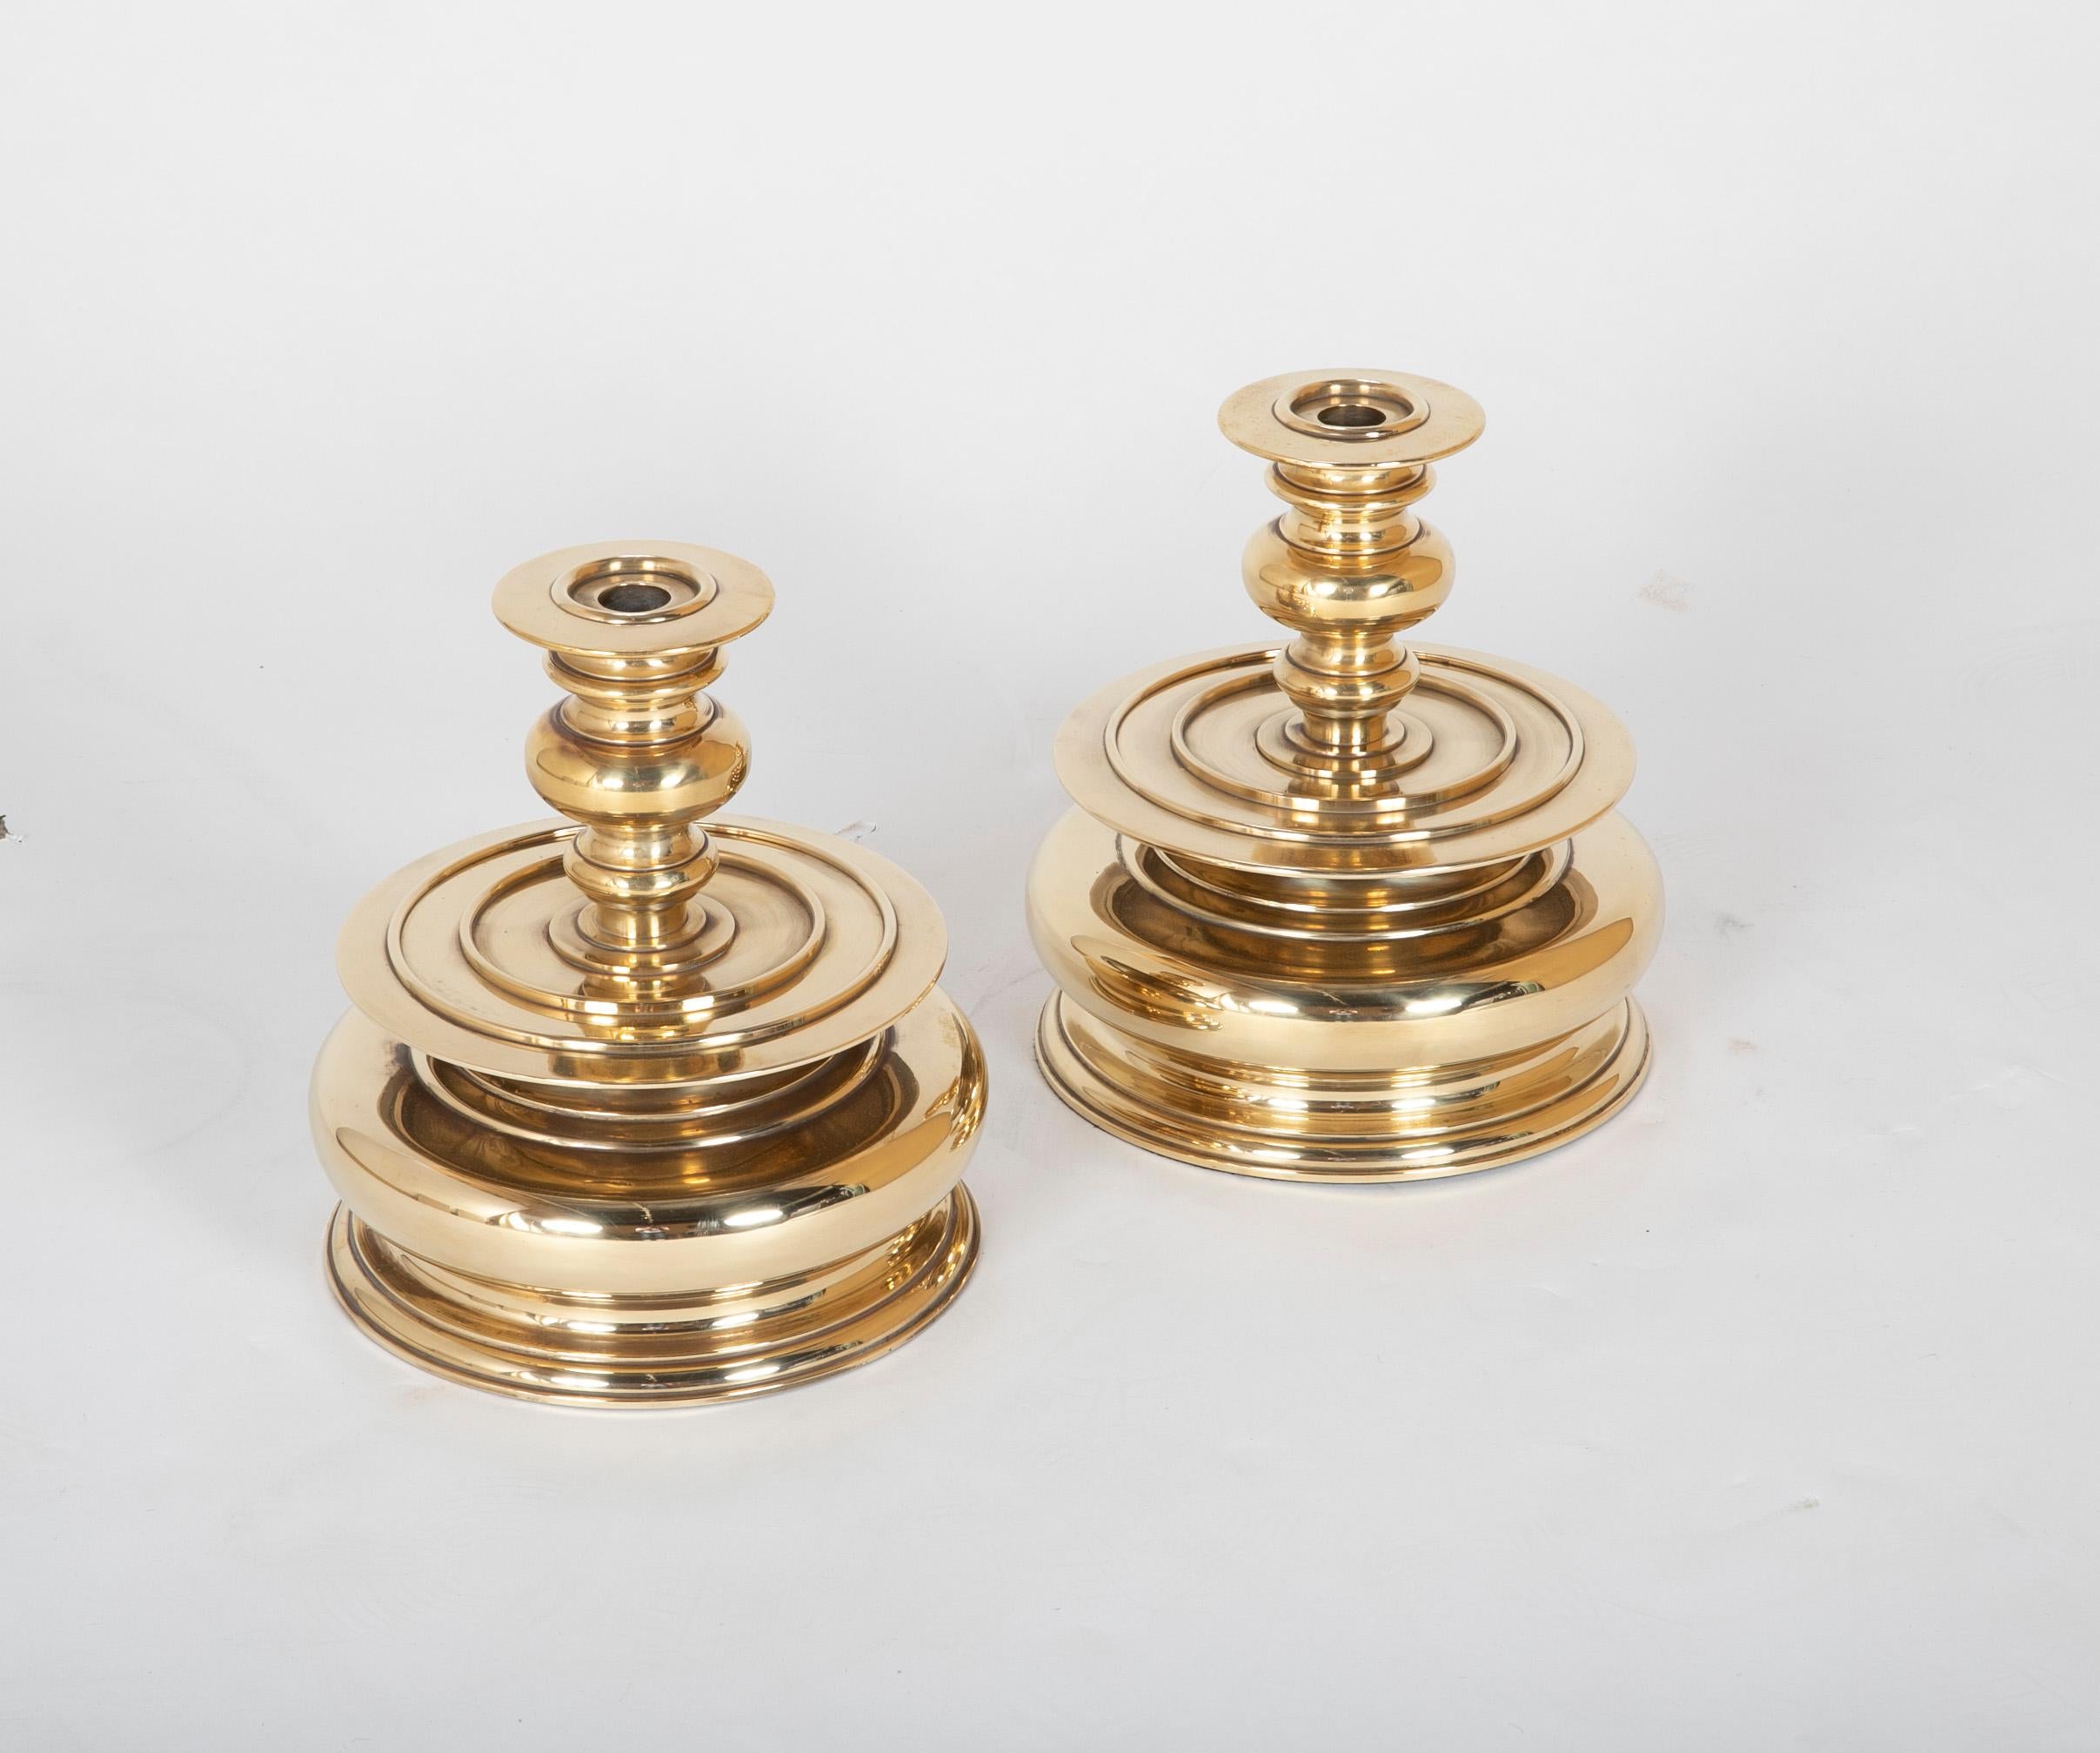 American Pair of Monumental Brass Hurricane Lamps by Chapman